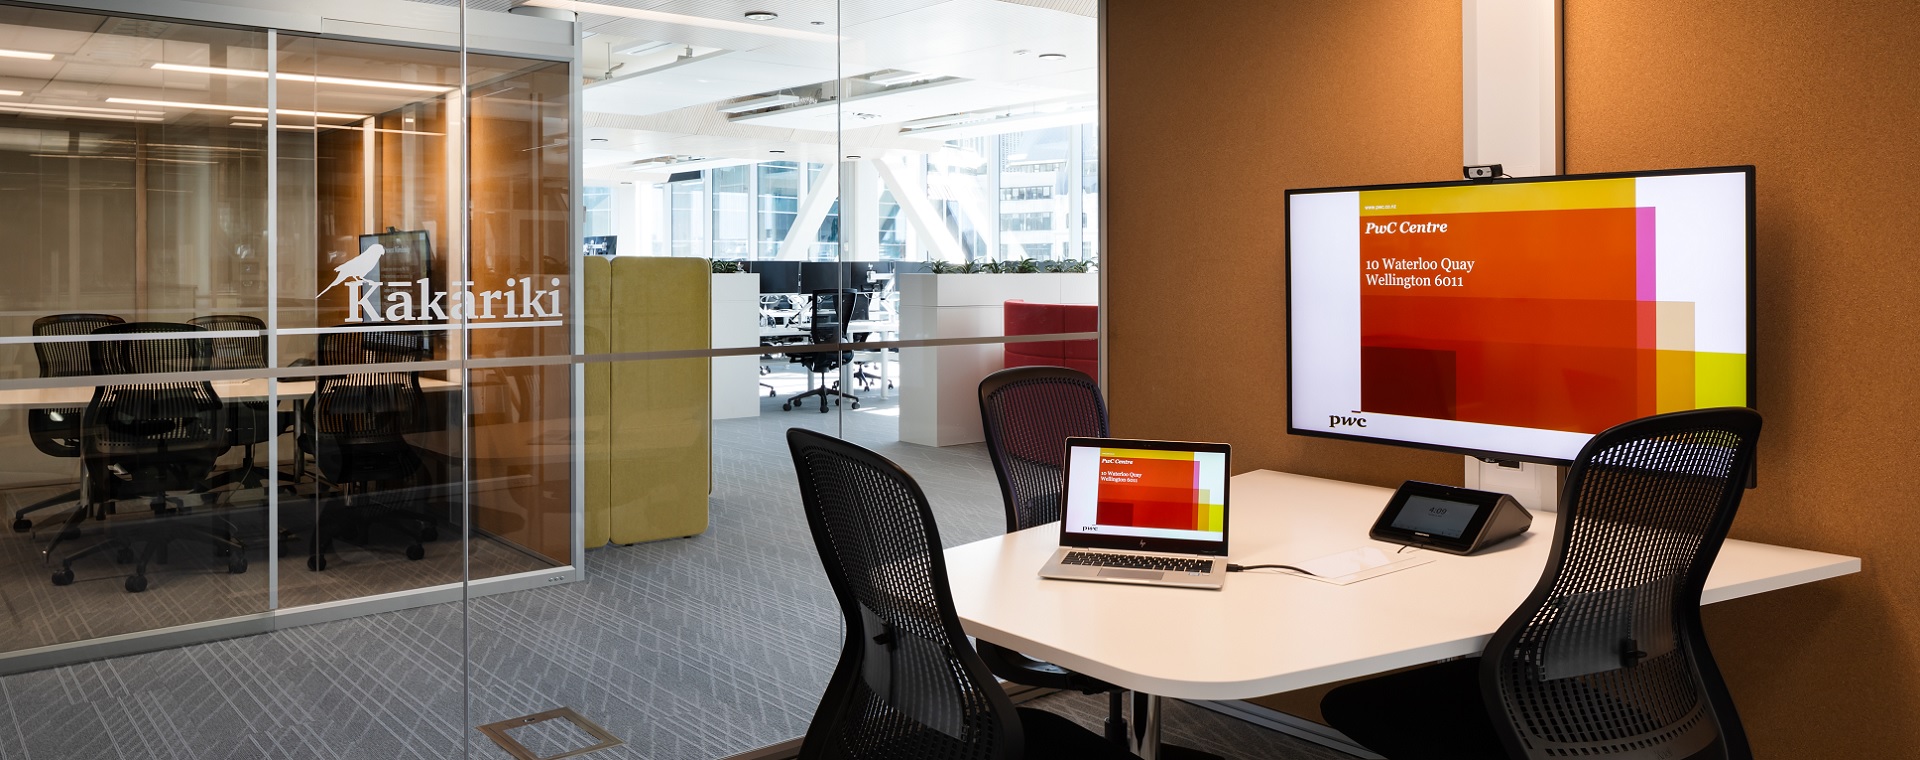 Small meeting room at PwC Wellington with tablet for AV control and video conferencing system.